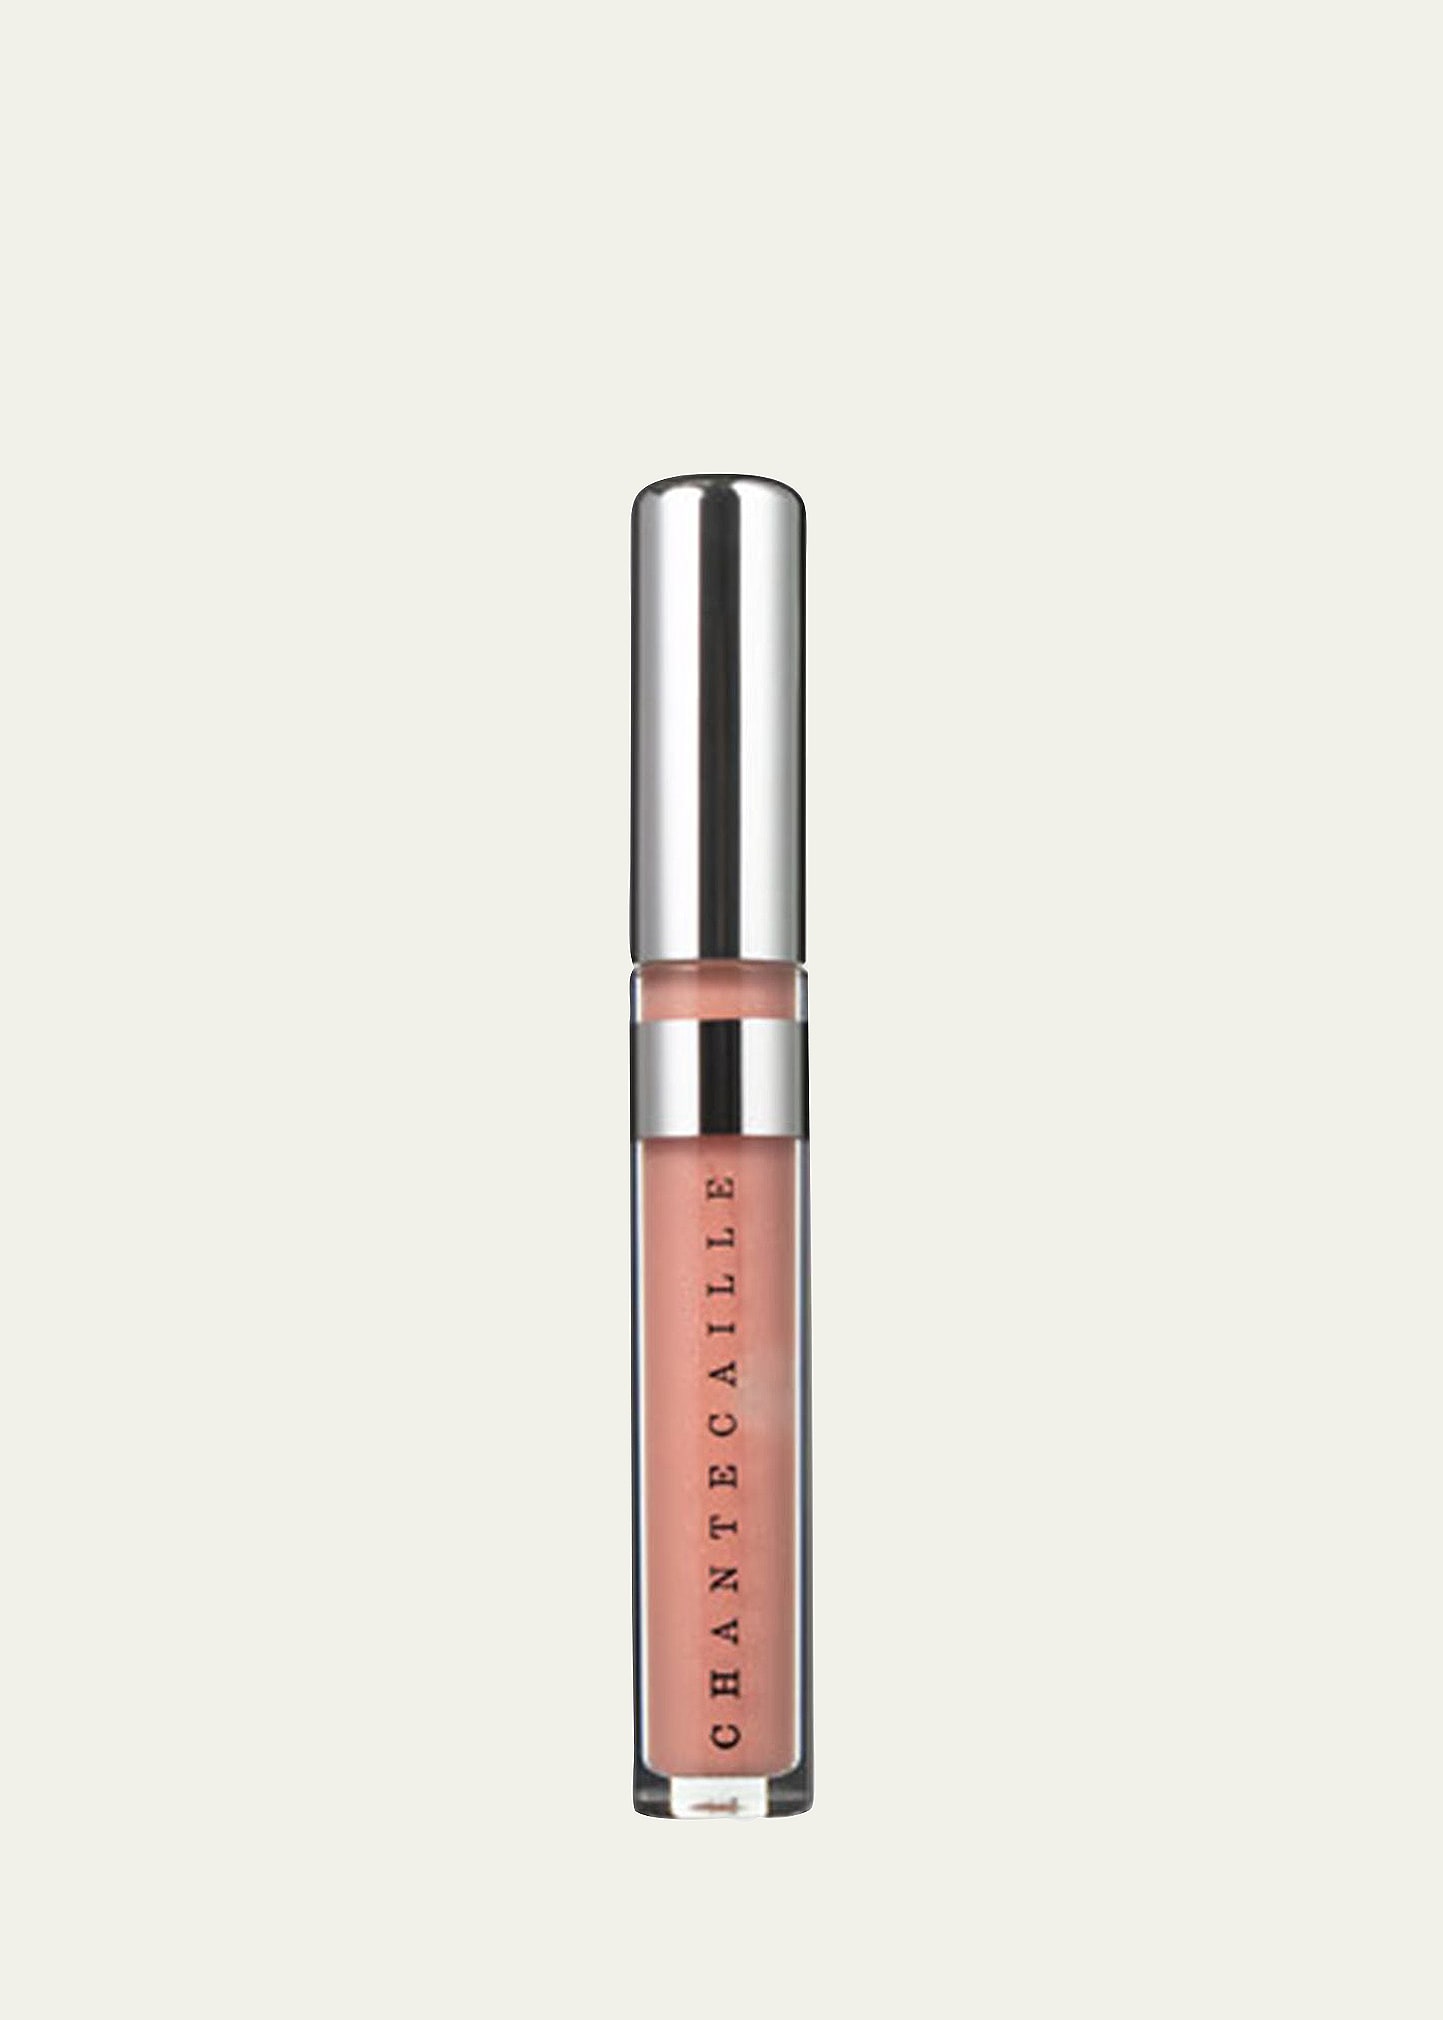 Chantecaille Brilliant Gloss In Charm